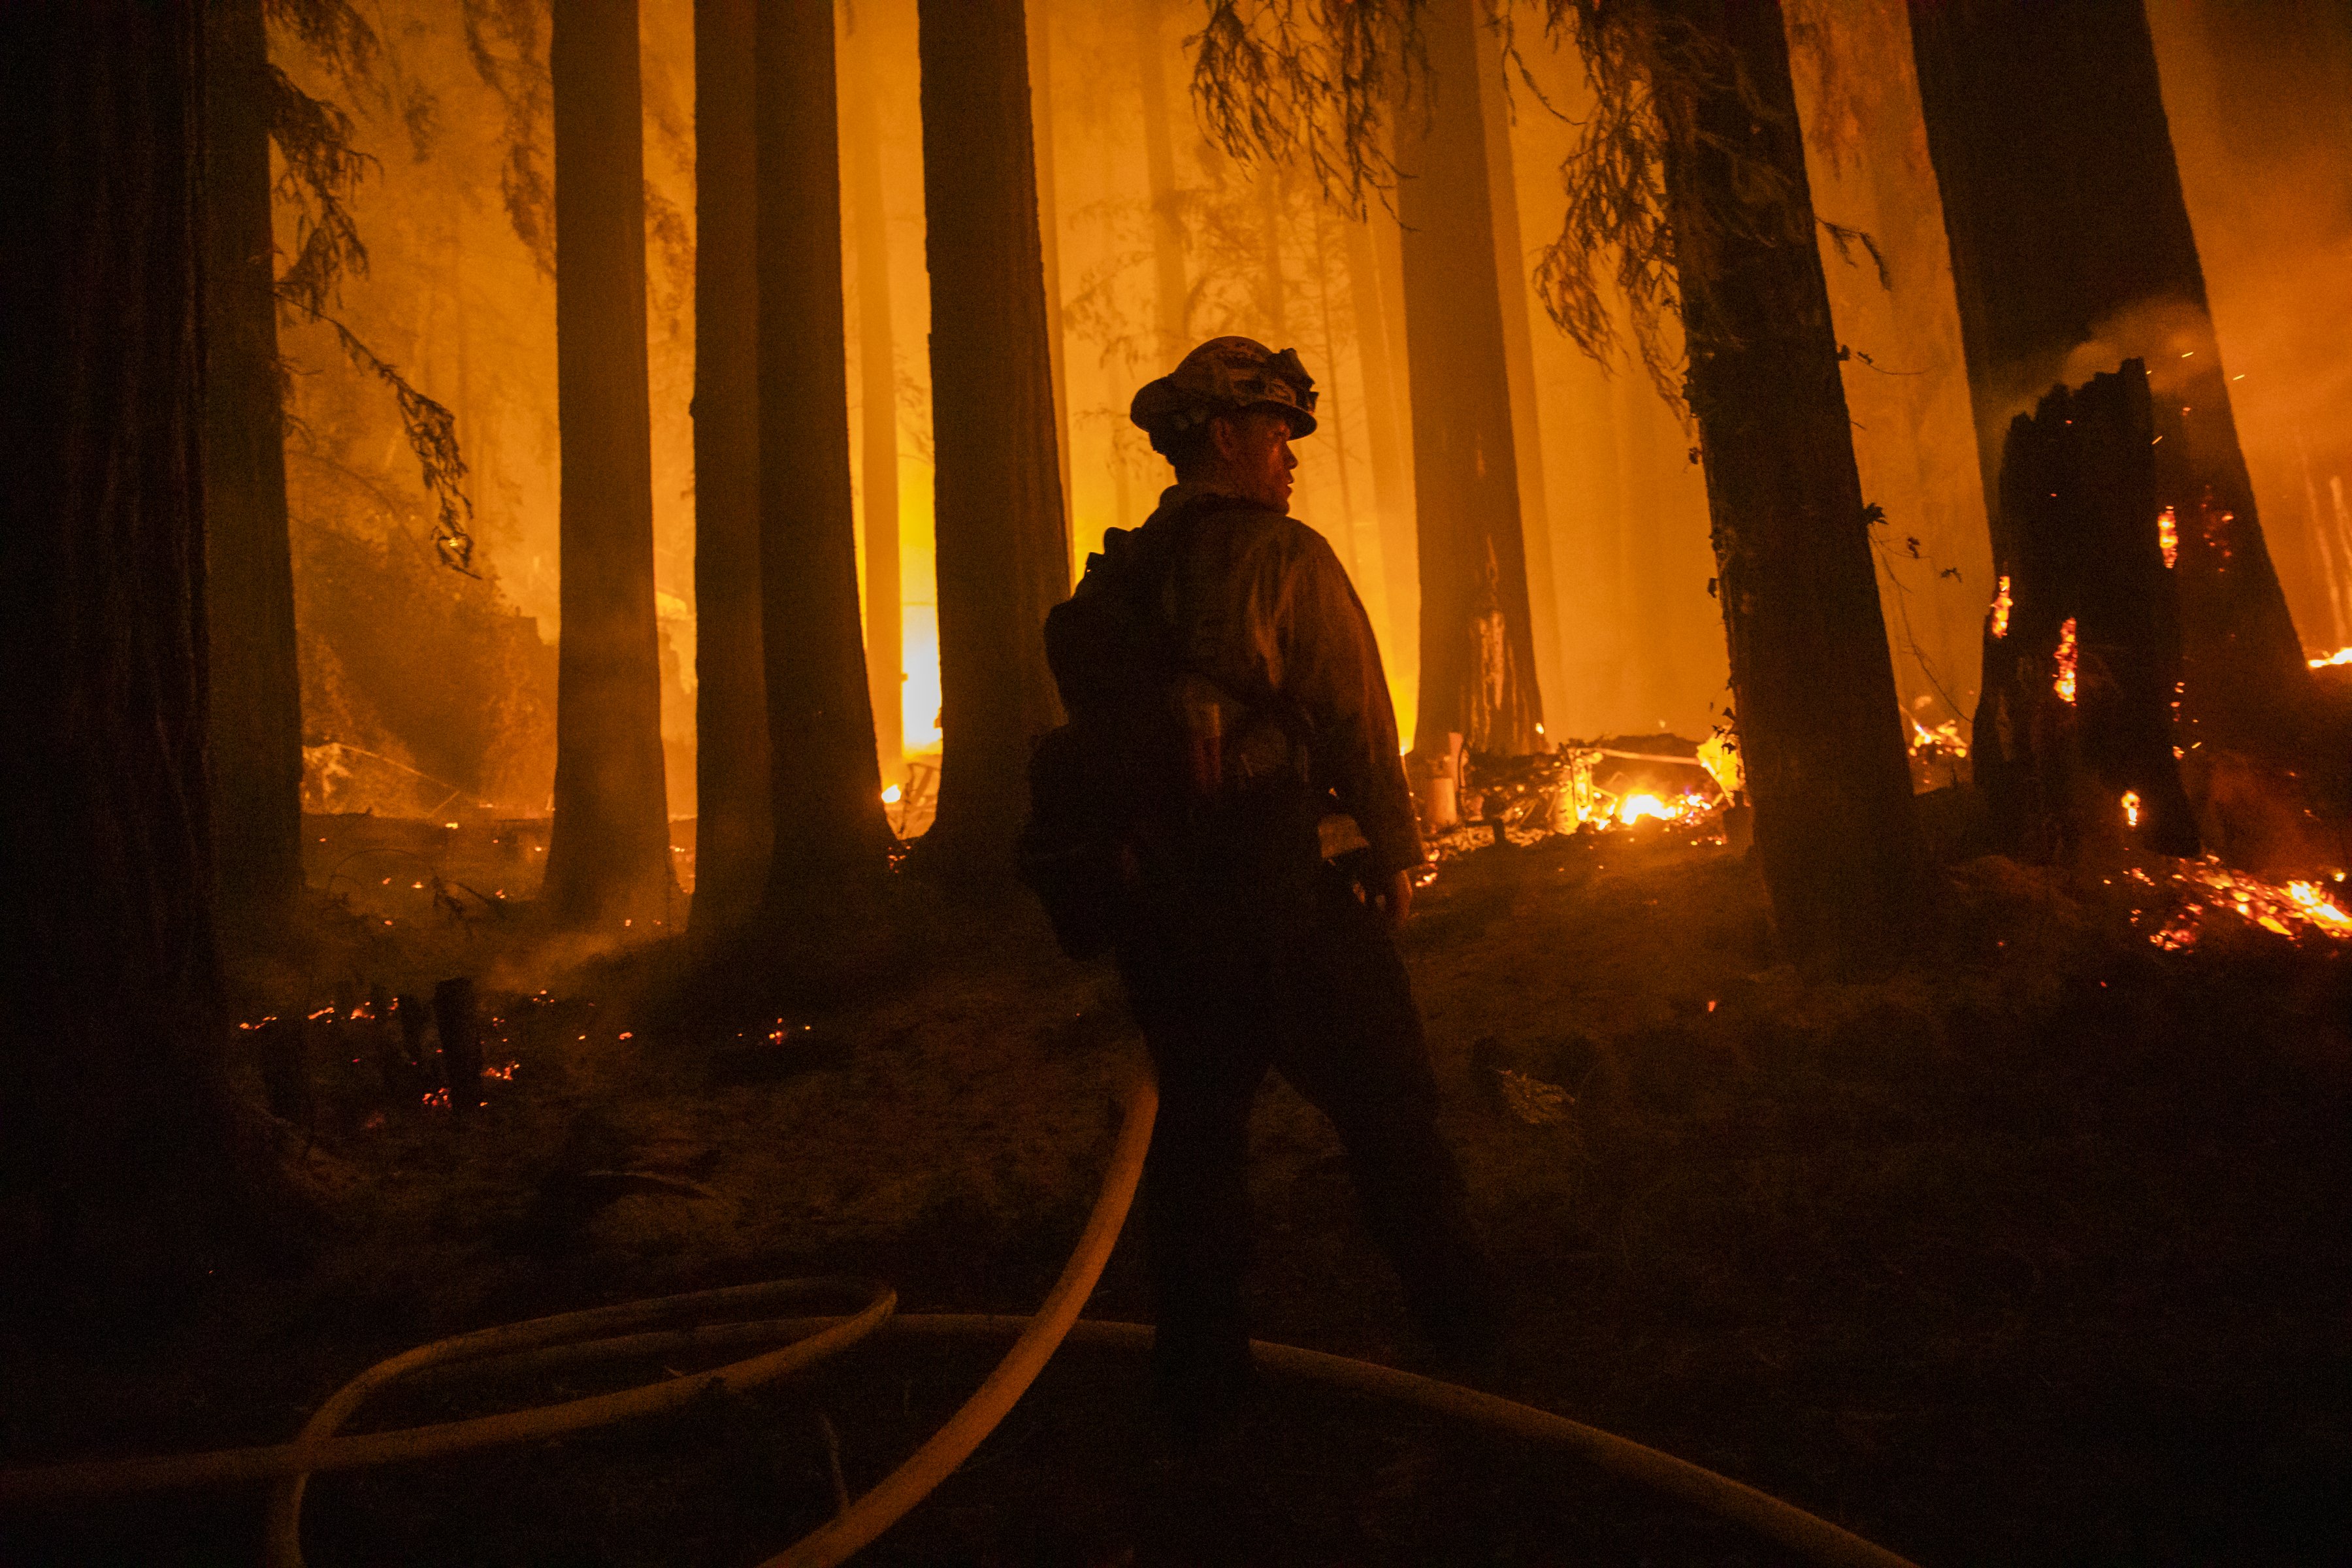 A firefighter with the Jameson Creek CDF station fights a fire on a property on Acorn Drive during the CZU Lightning Complex fire in Santa Cruz County, California, U.S., on Thursday, Aug. 20, 2020. | Source: Getty Images.